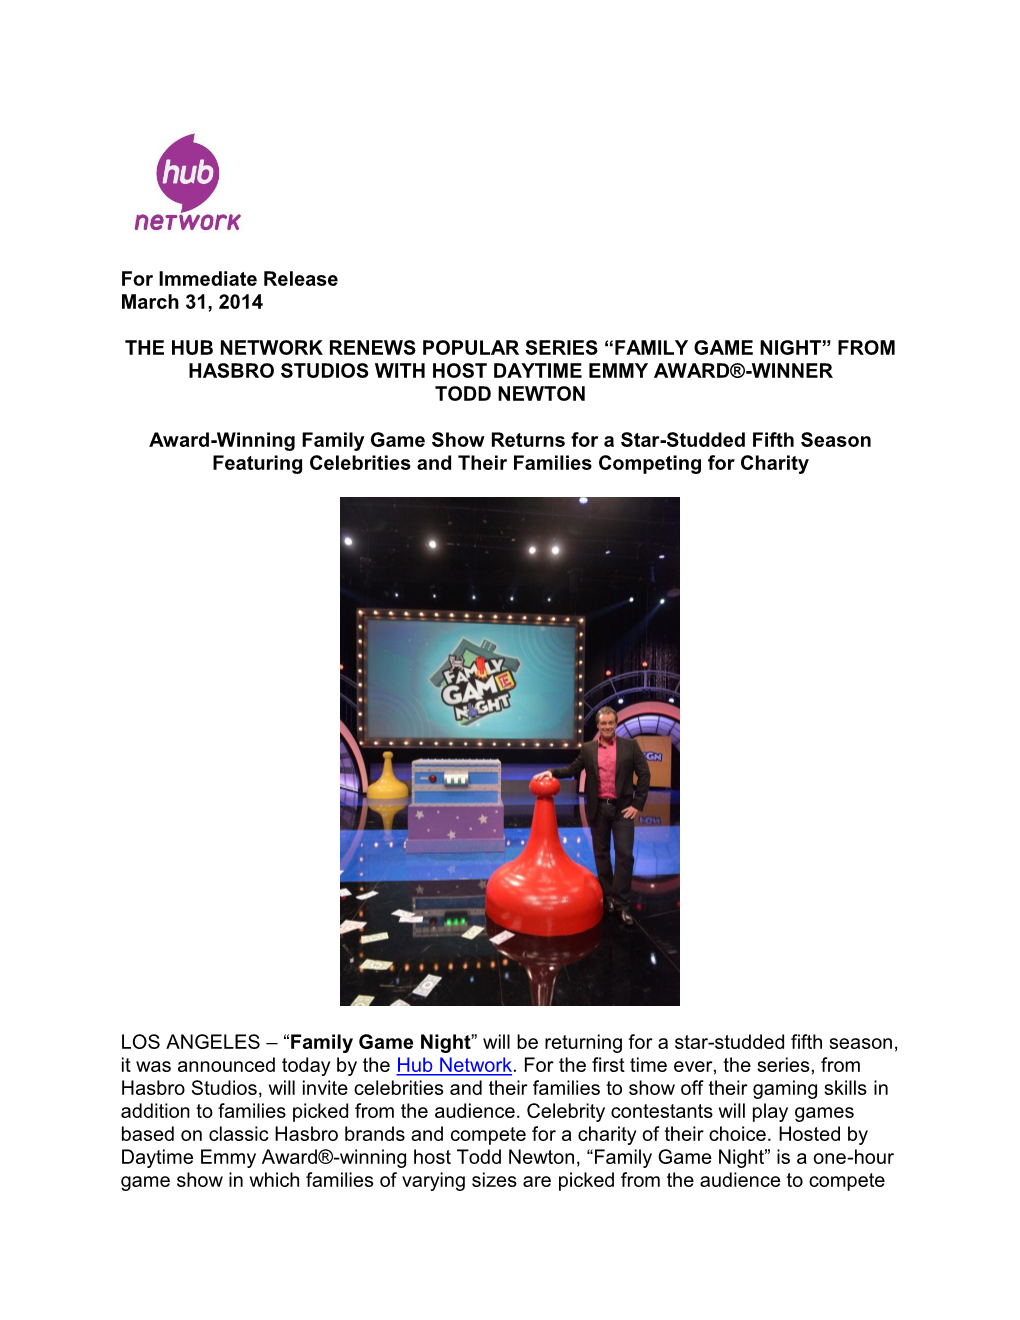 For Immediate Release March 31, 2014 the HUB